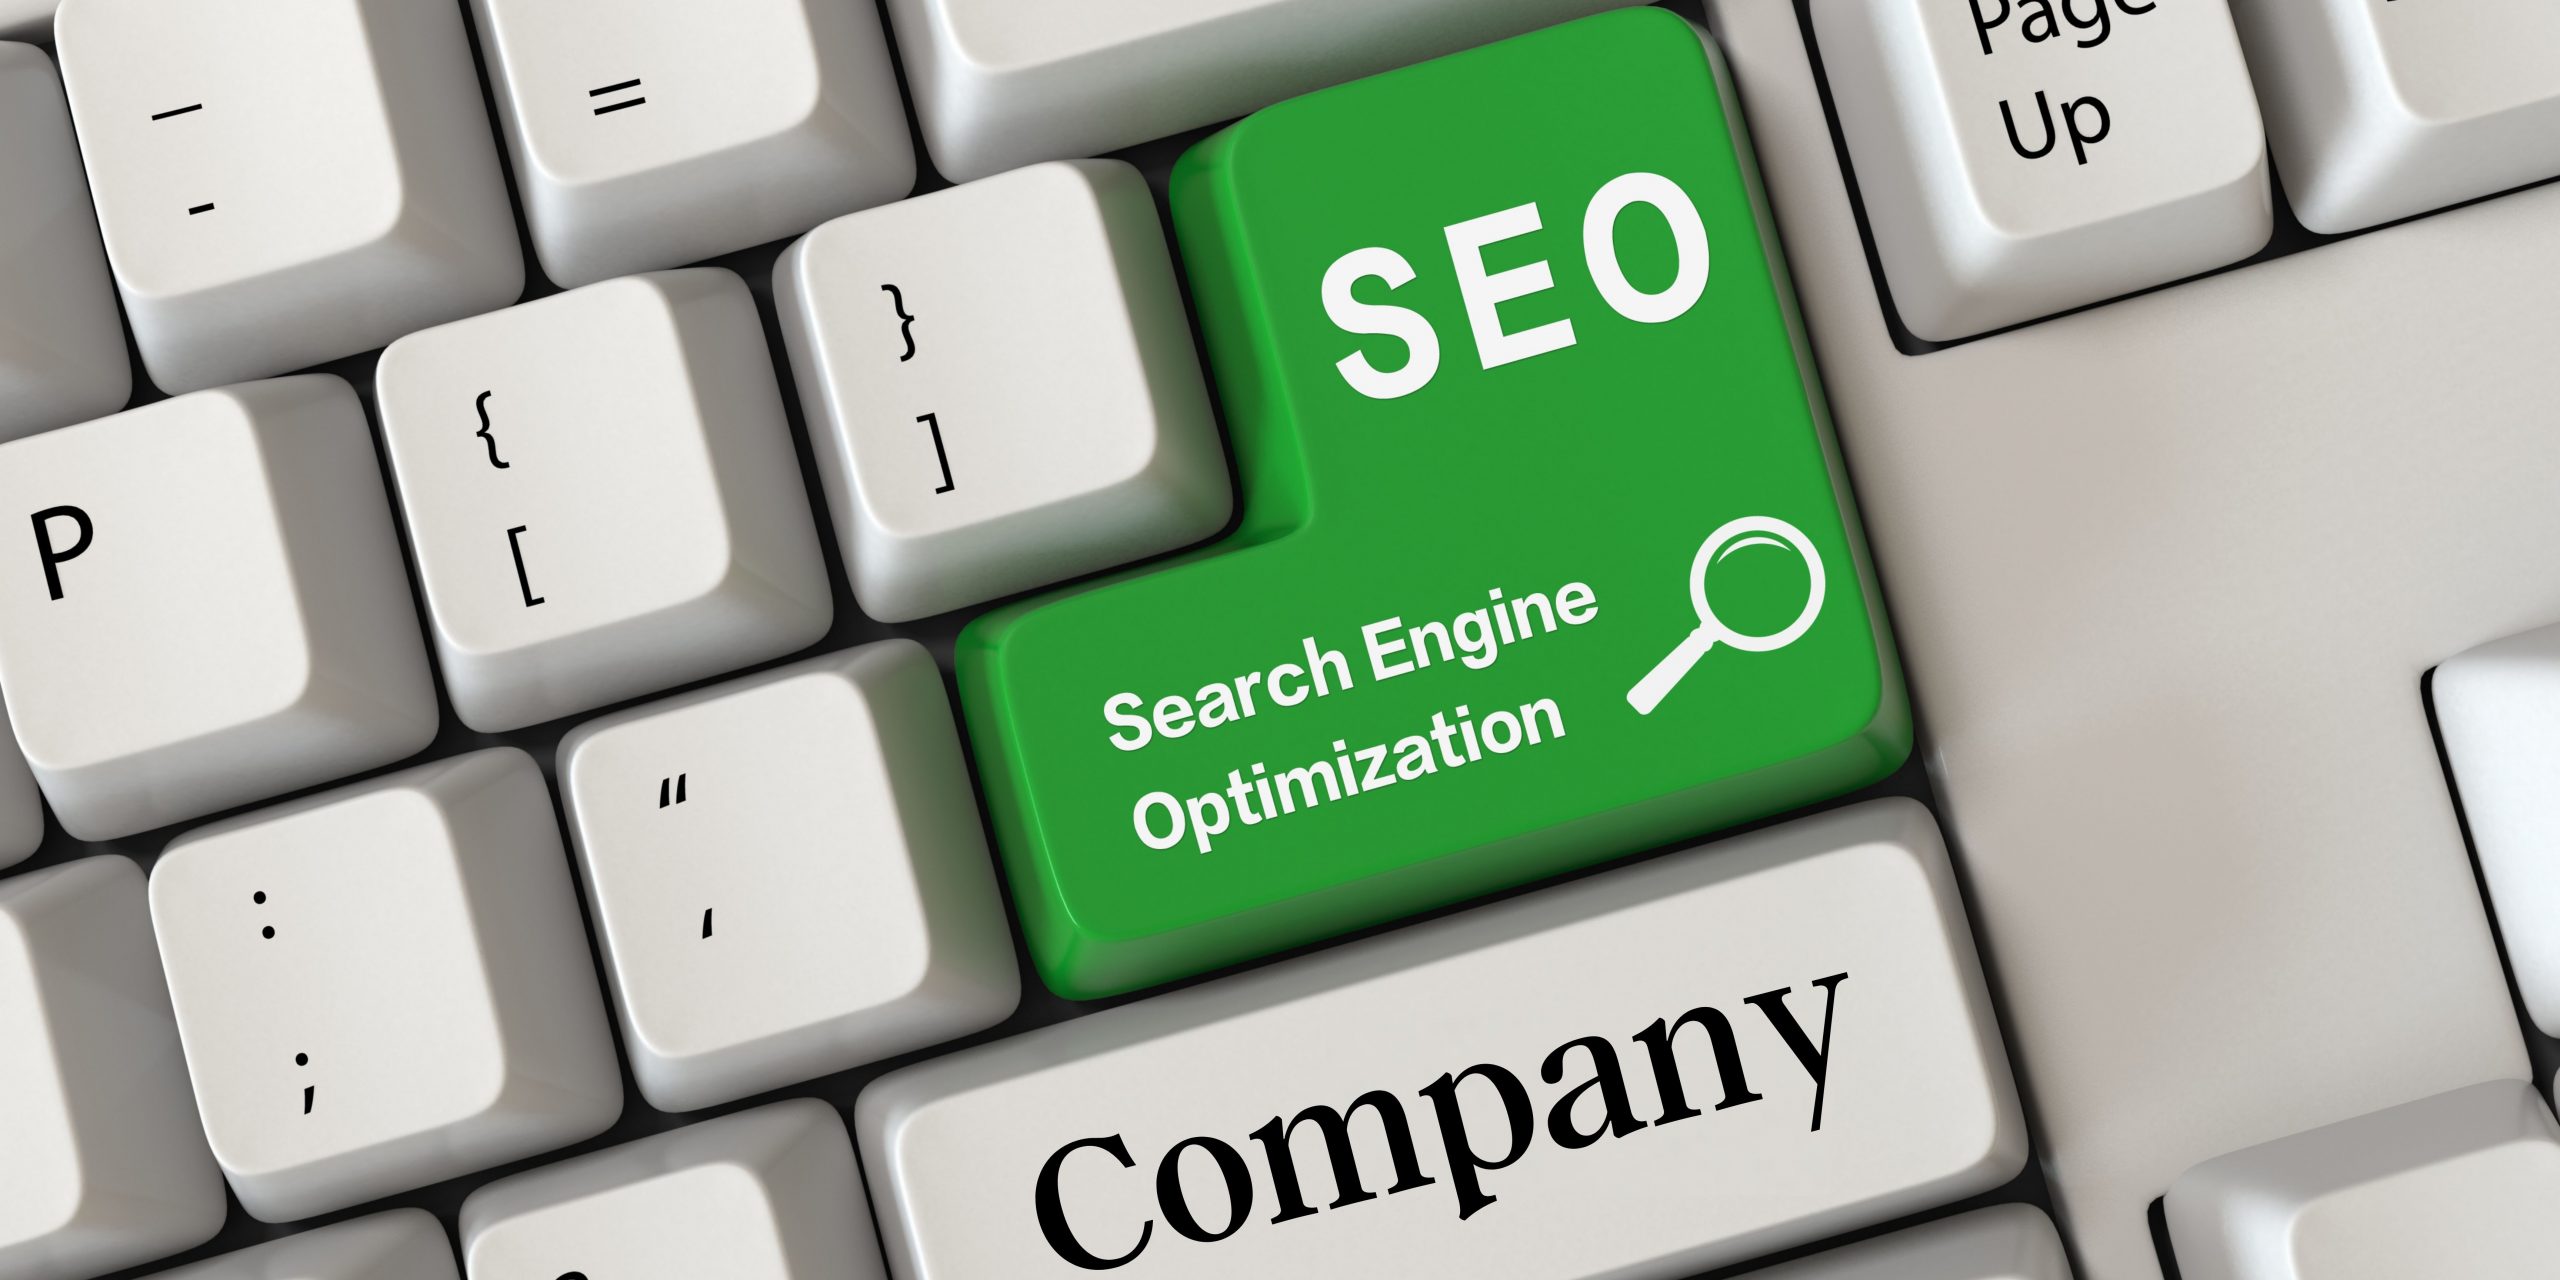 How to Find an Affordable SEO Company